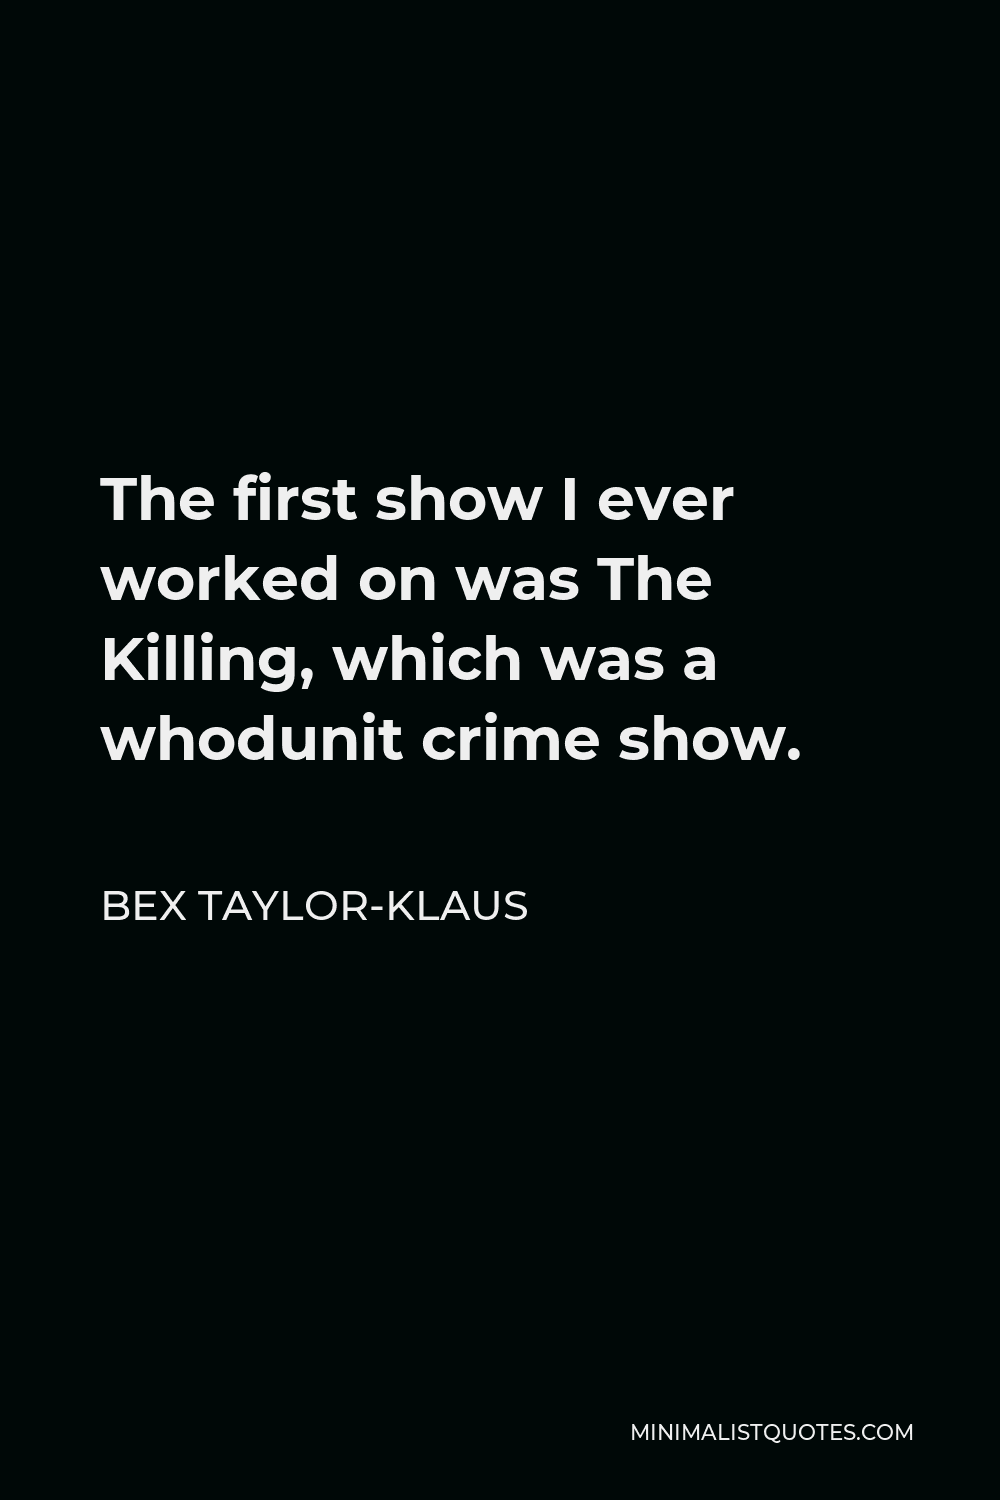 Bex Taylor-Klaus Quote - The first show I ever worked on was The Killing, which was a whodunit crime show.